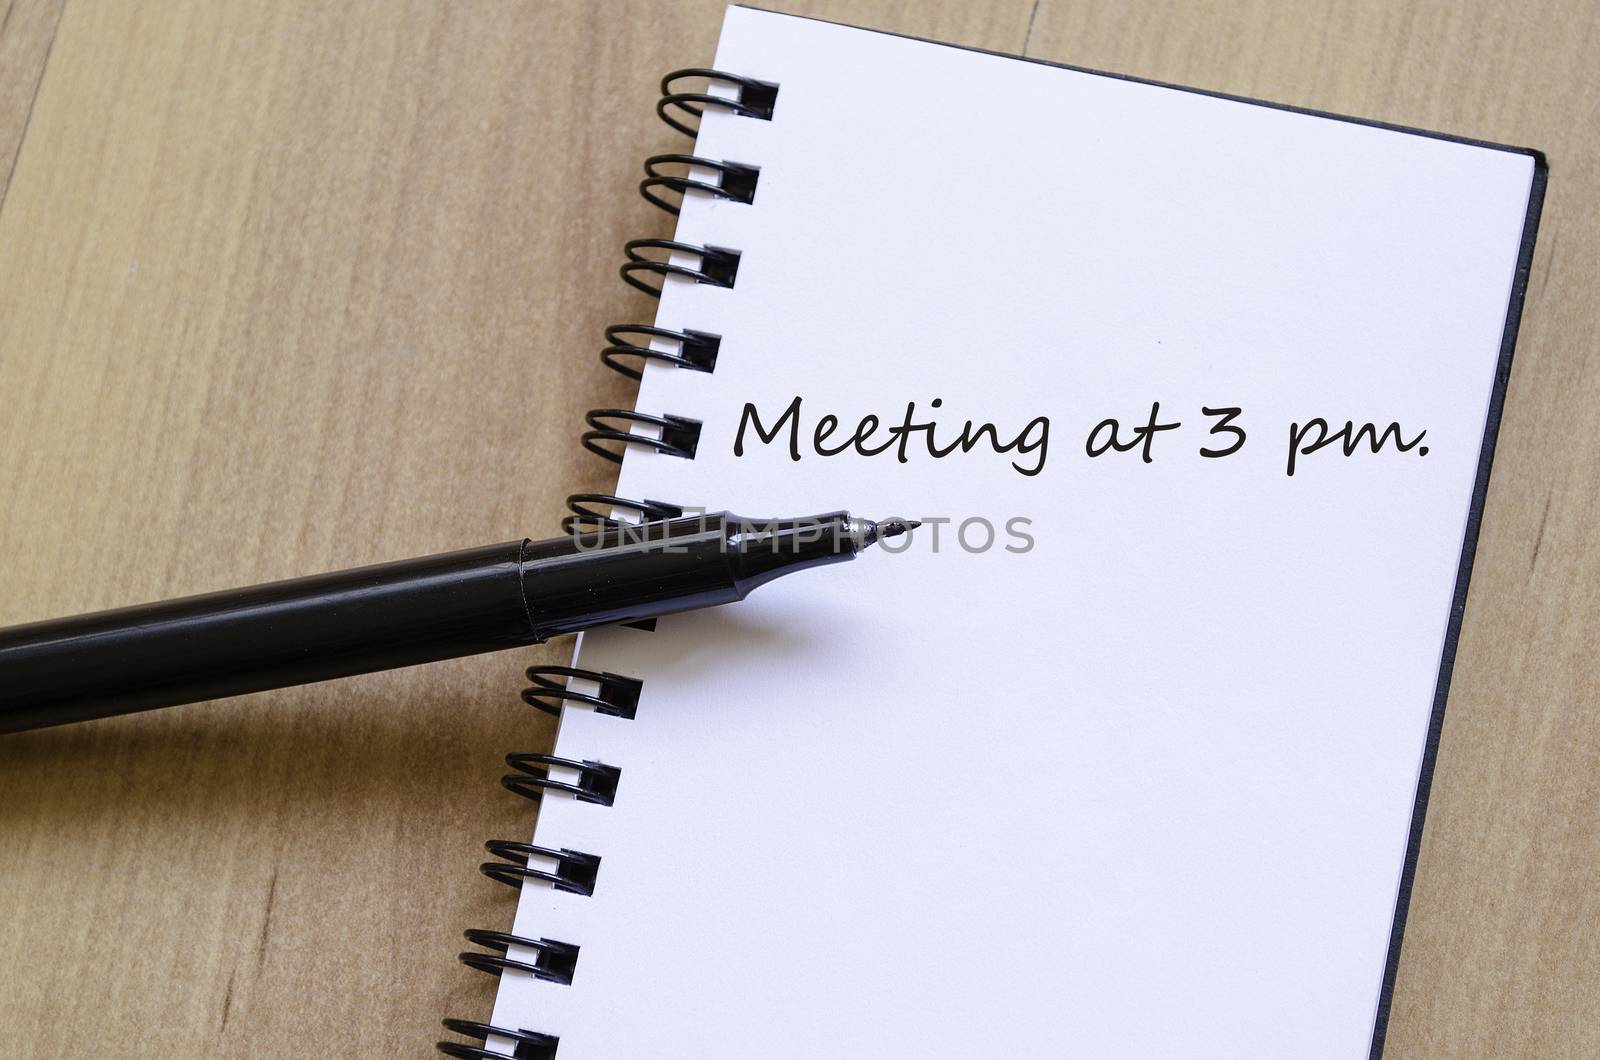 Schedule Notepad Meeting at 3 pm.